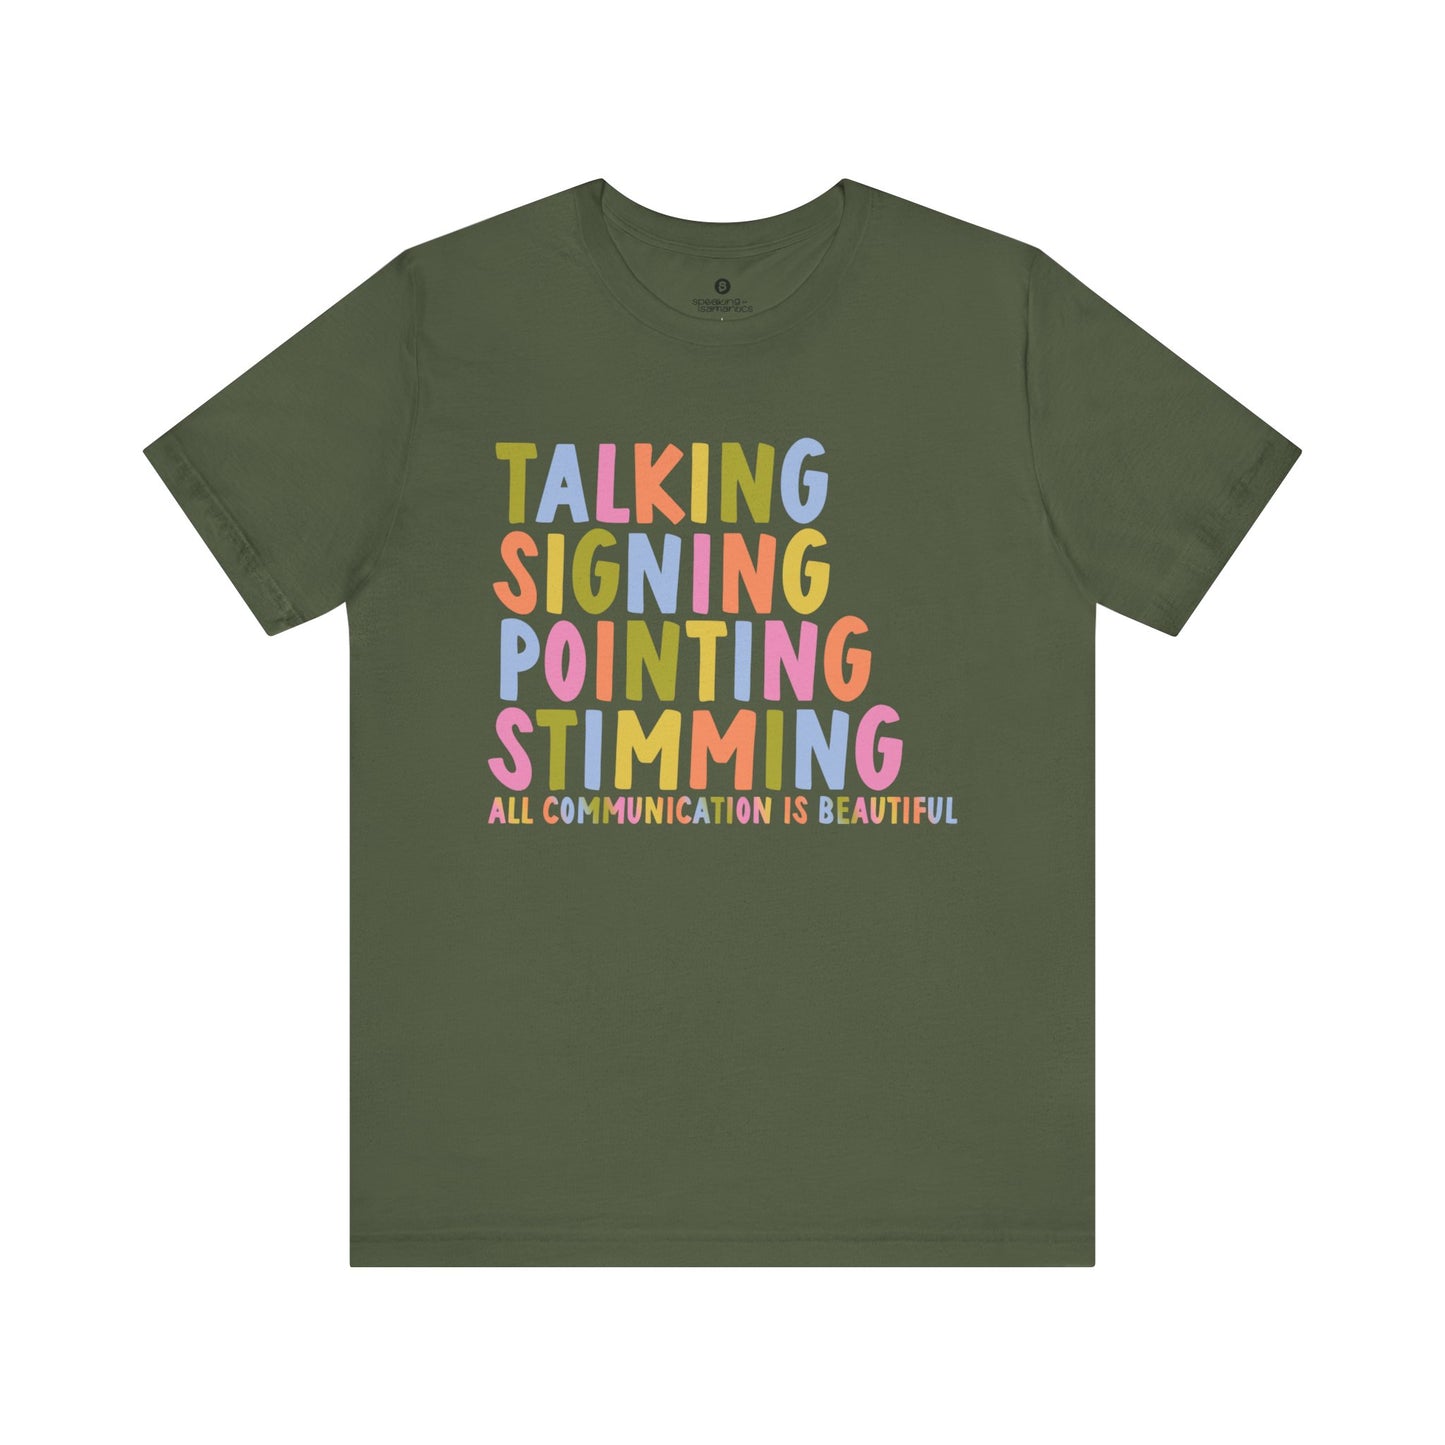 Talking Signing Pointing Stimming All Communication is Beautiful Tee